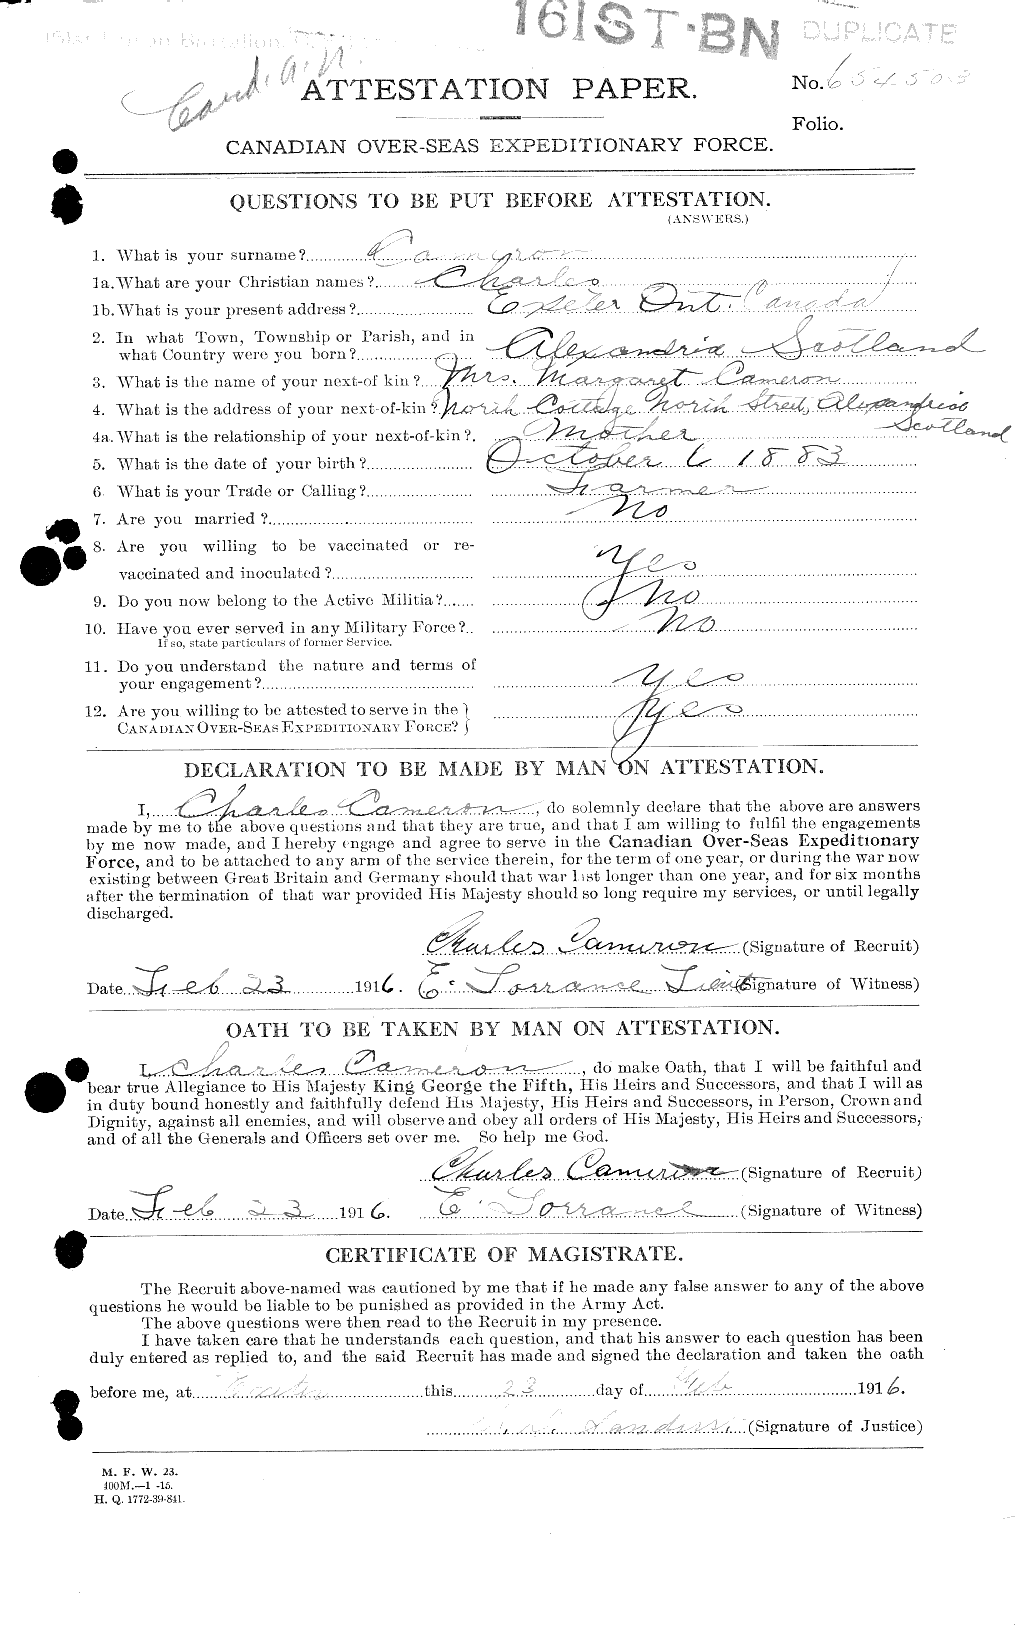 Personnel Records of the First World War - CEF 002593a